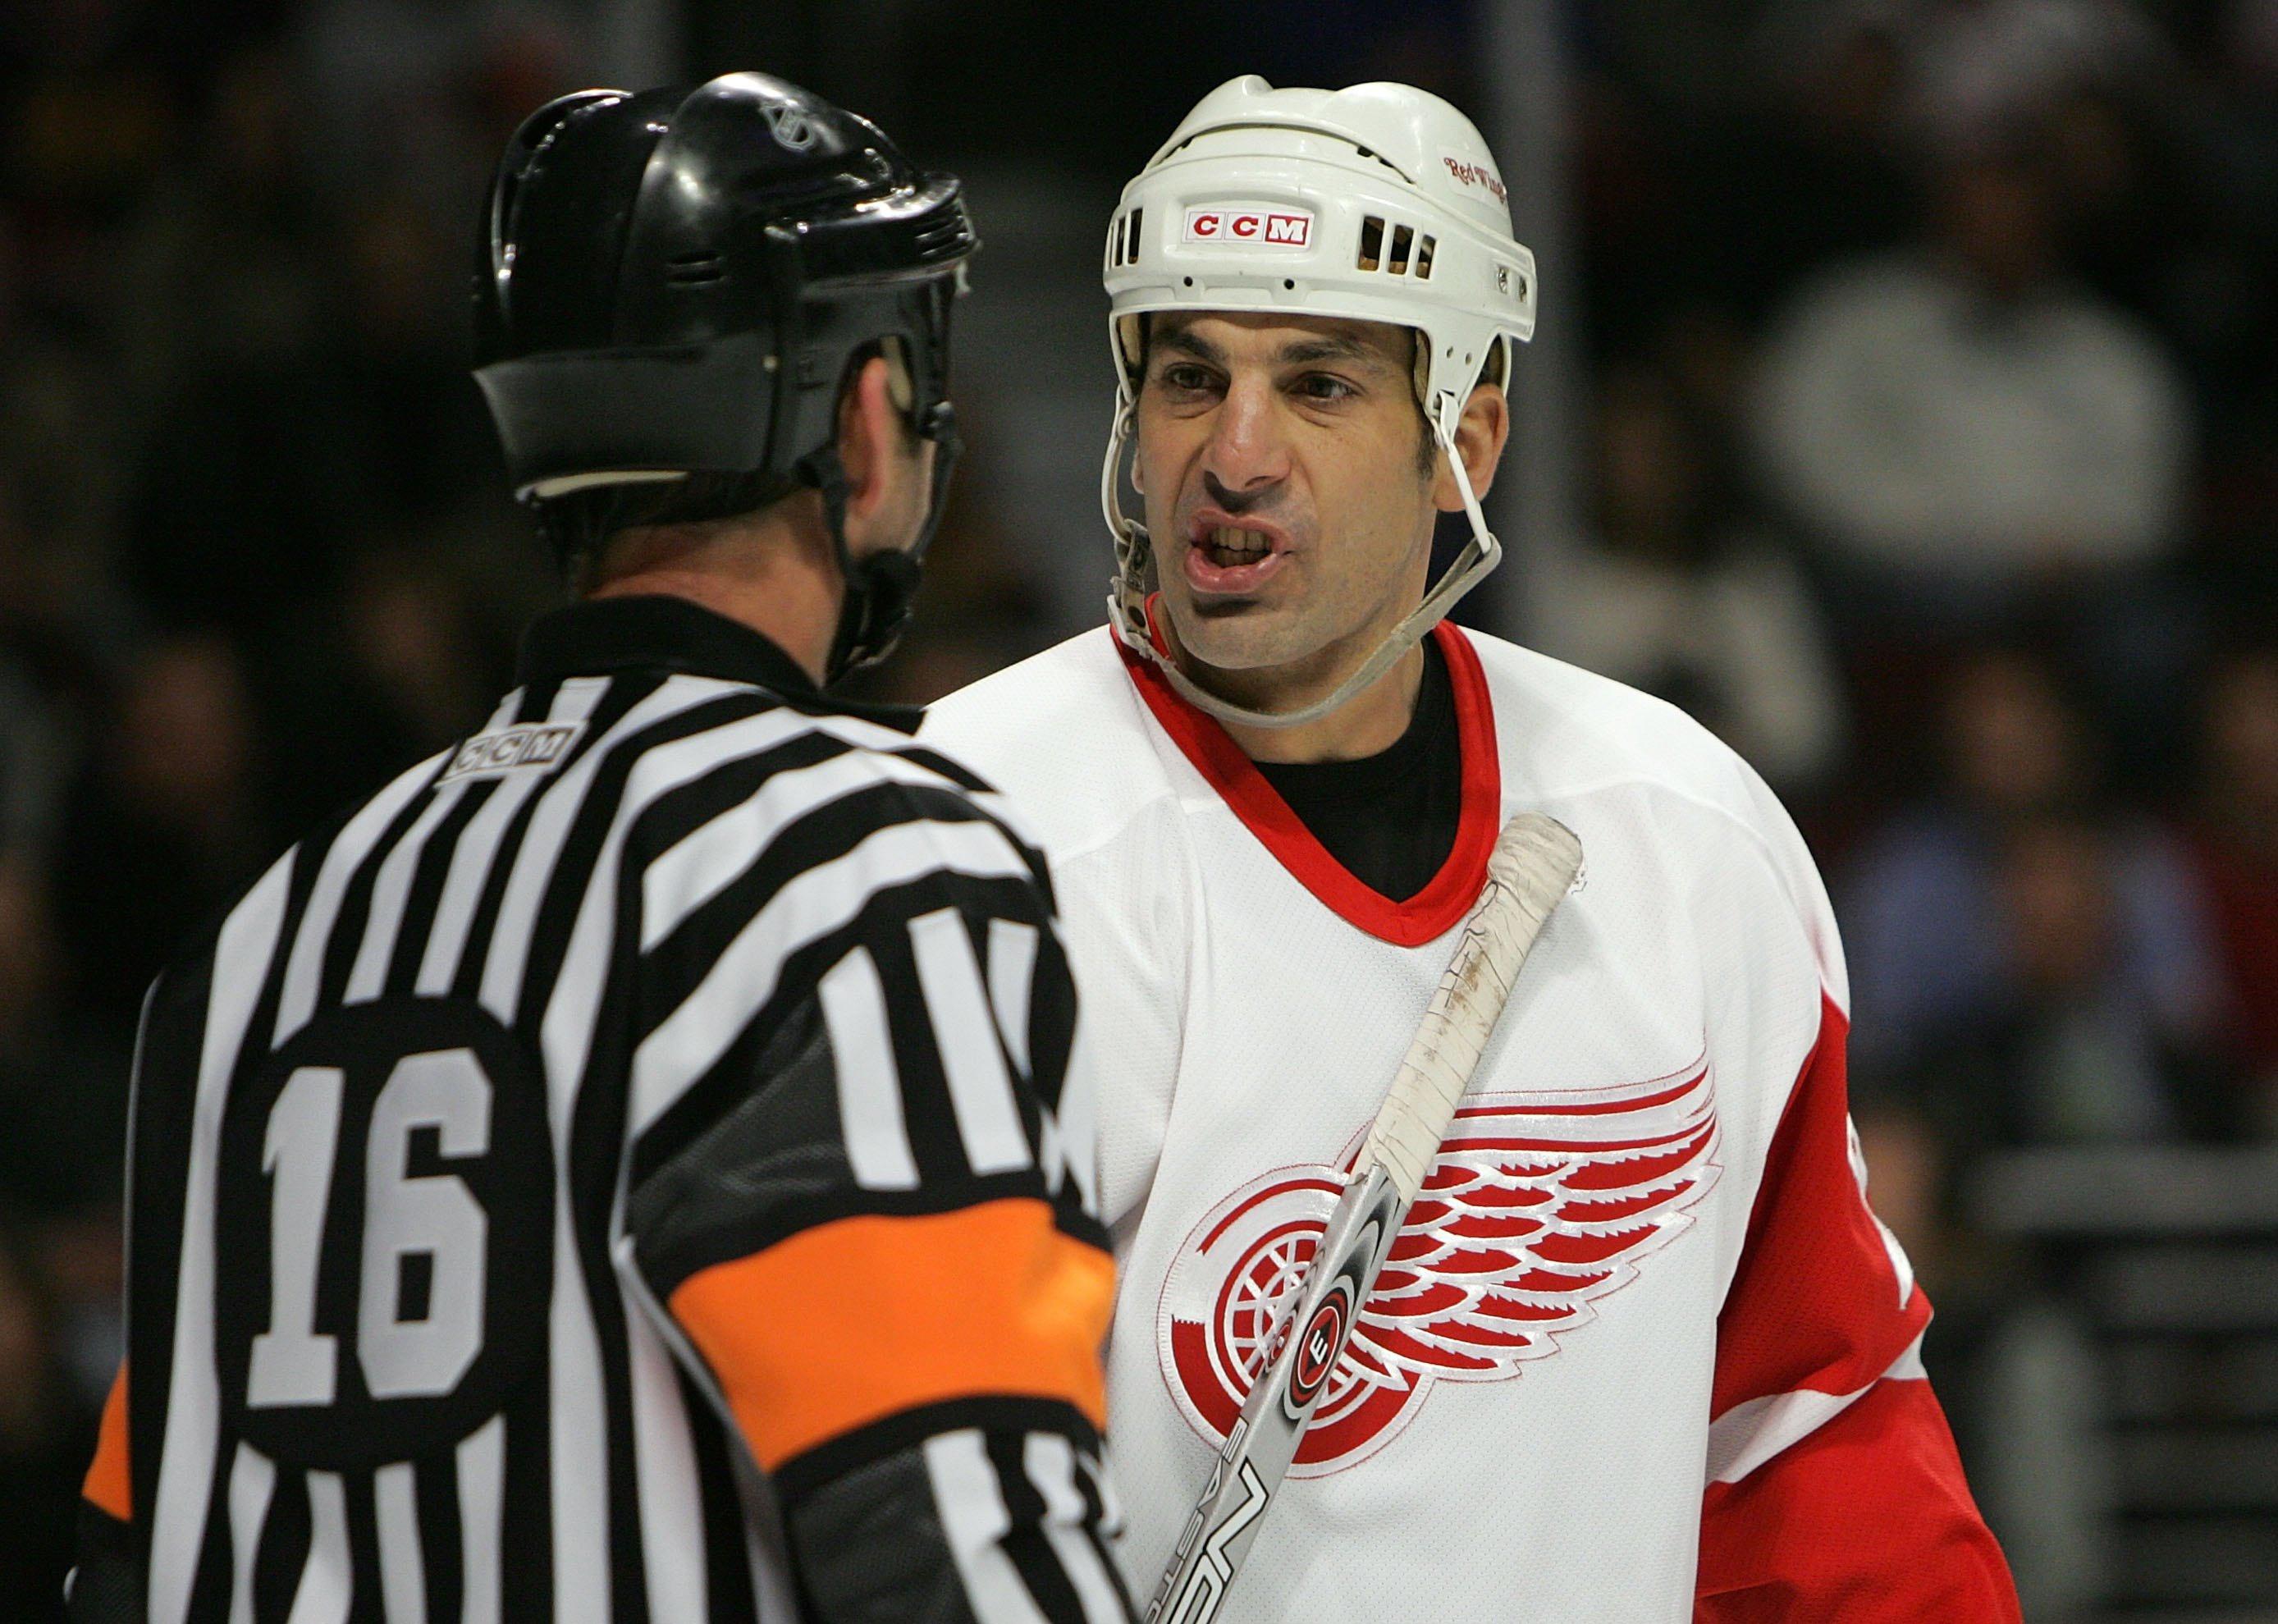 Chris Chelios of the Detroit Red Wings talks with a referee.